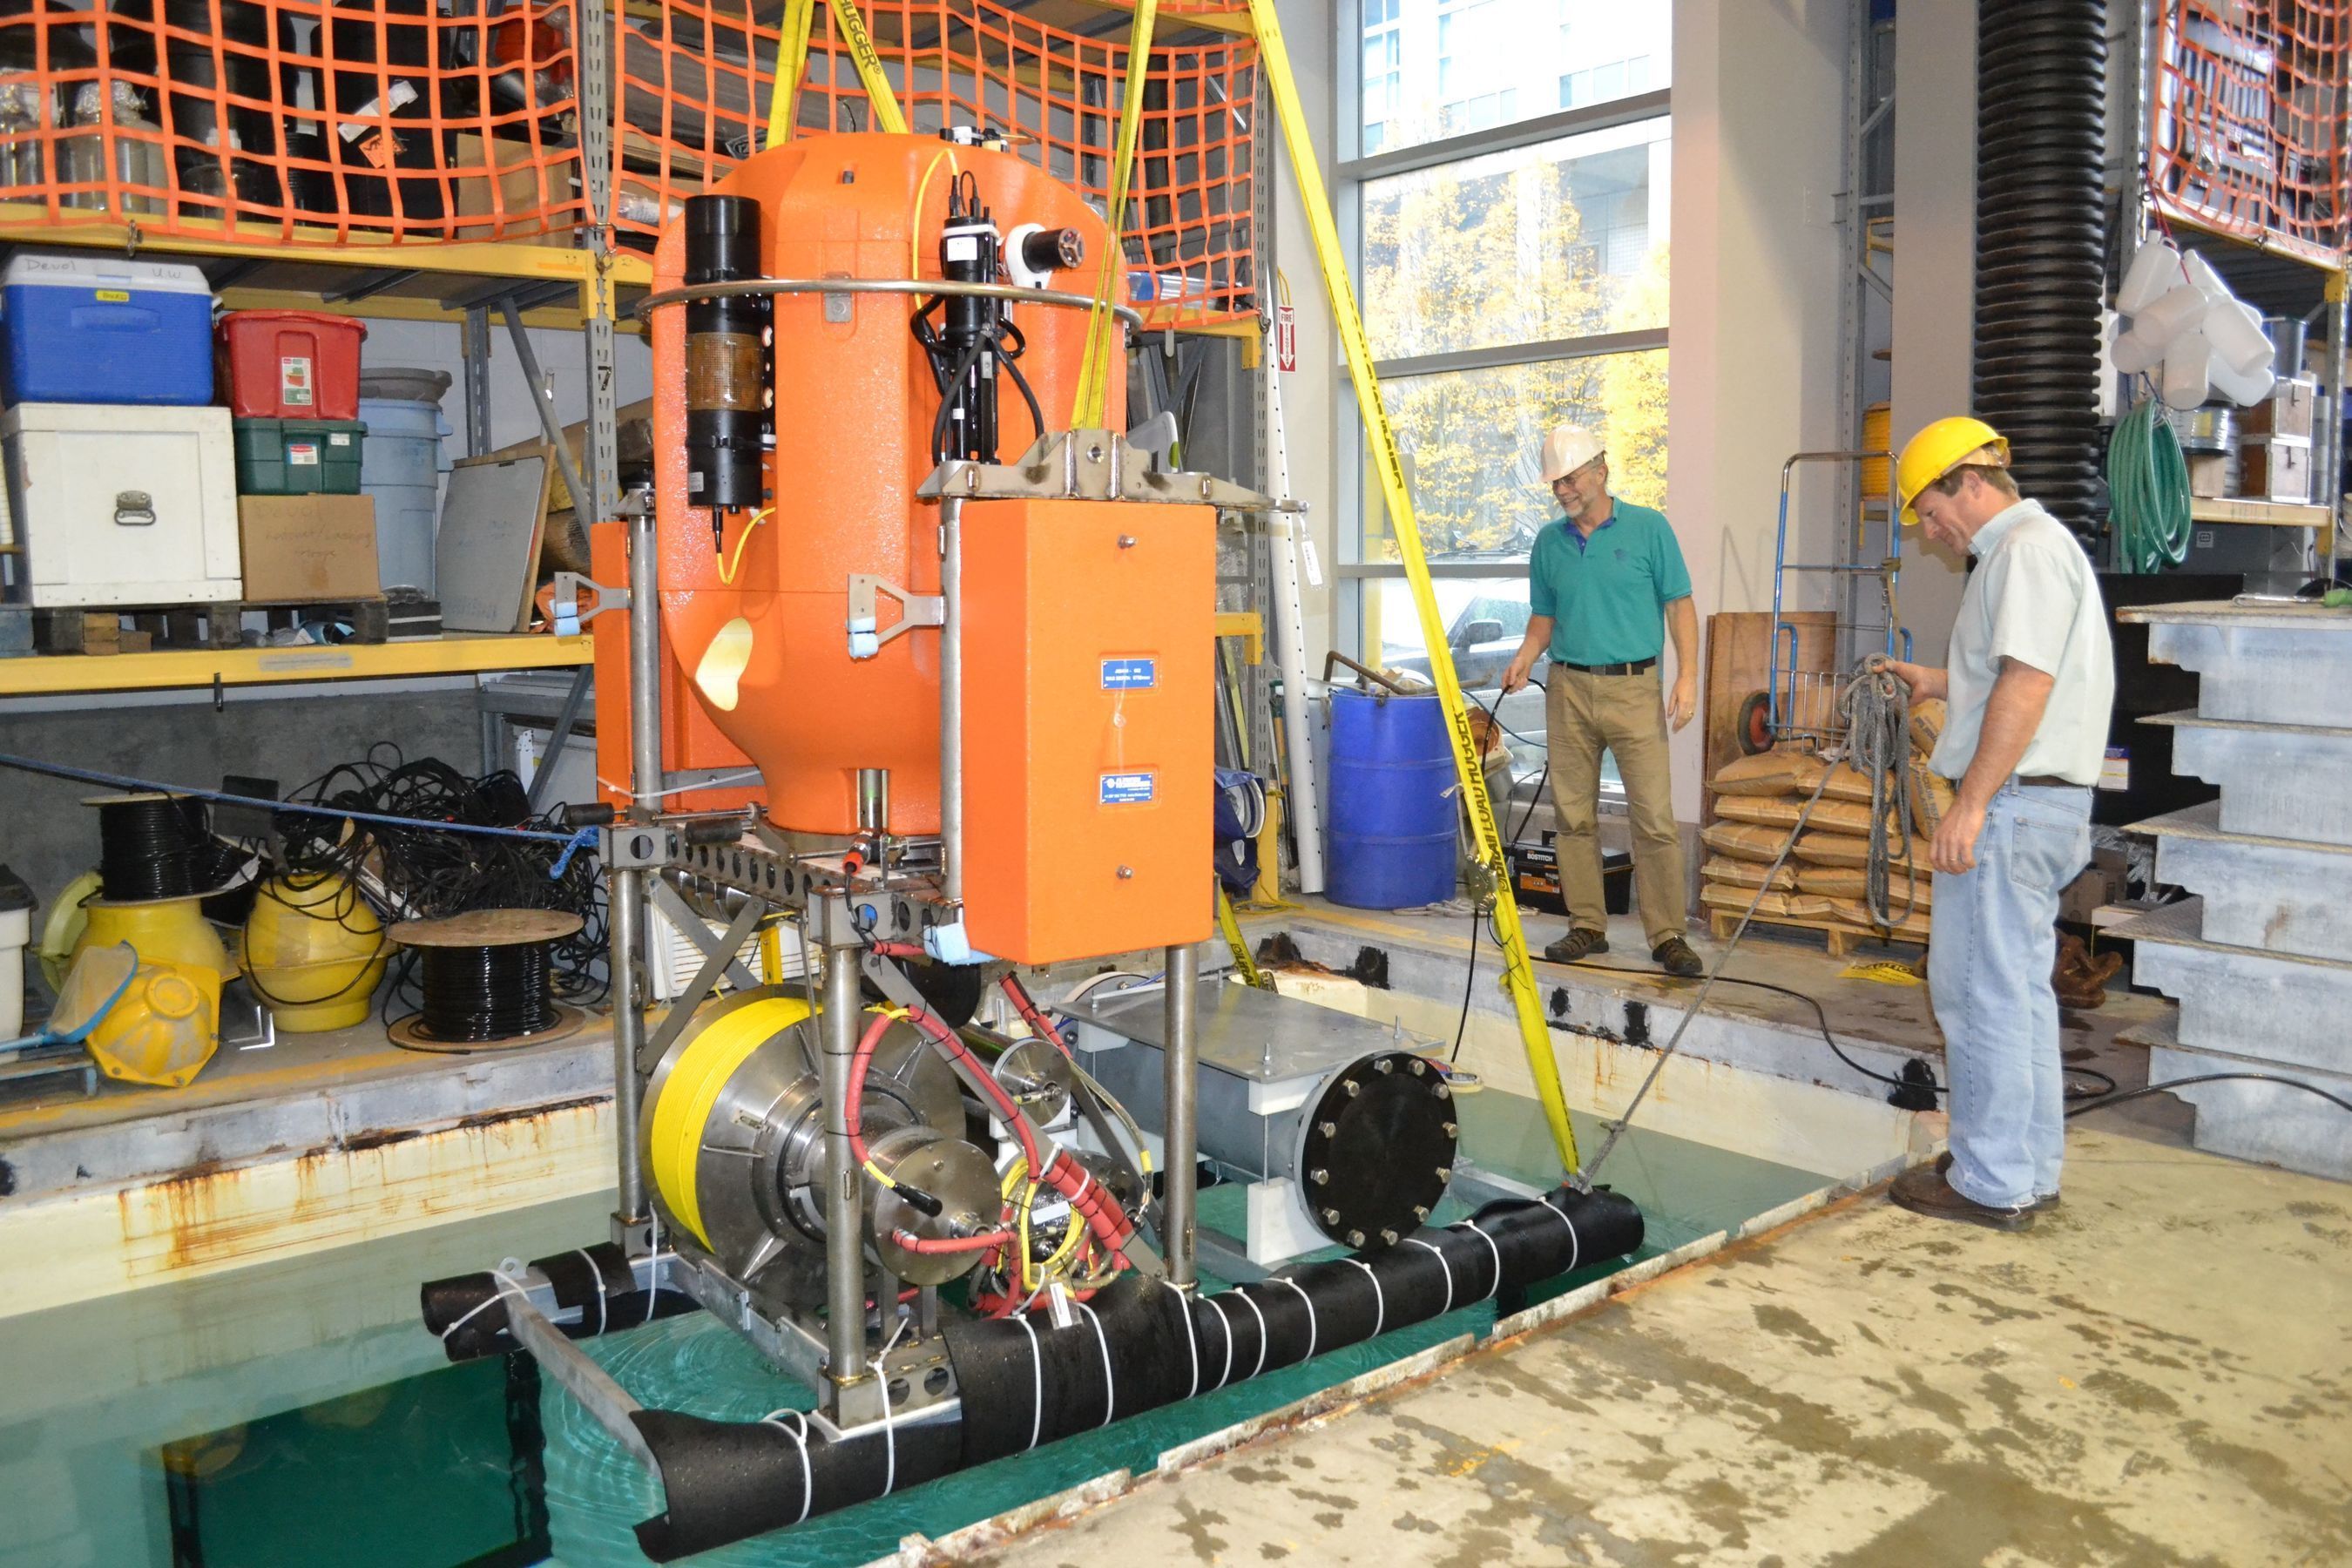 The initial shallow profiler undergoes testing at the University of Washington.  DeepWater Buoyancy's syntactic foam systems (in orange) will provide uplift and platform stability for the Regional Scale Nodes portion of the Ocean Observatories Initiative.  Photo: Mitch Elend, University of Washington (PRNewsFoto/DeepWater Buoyancy)